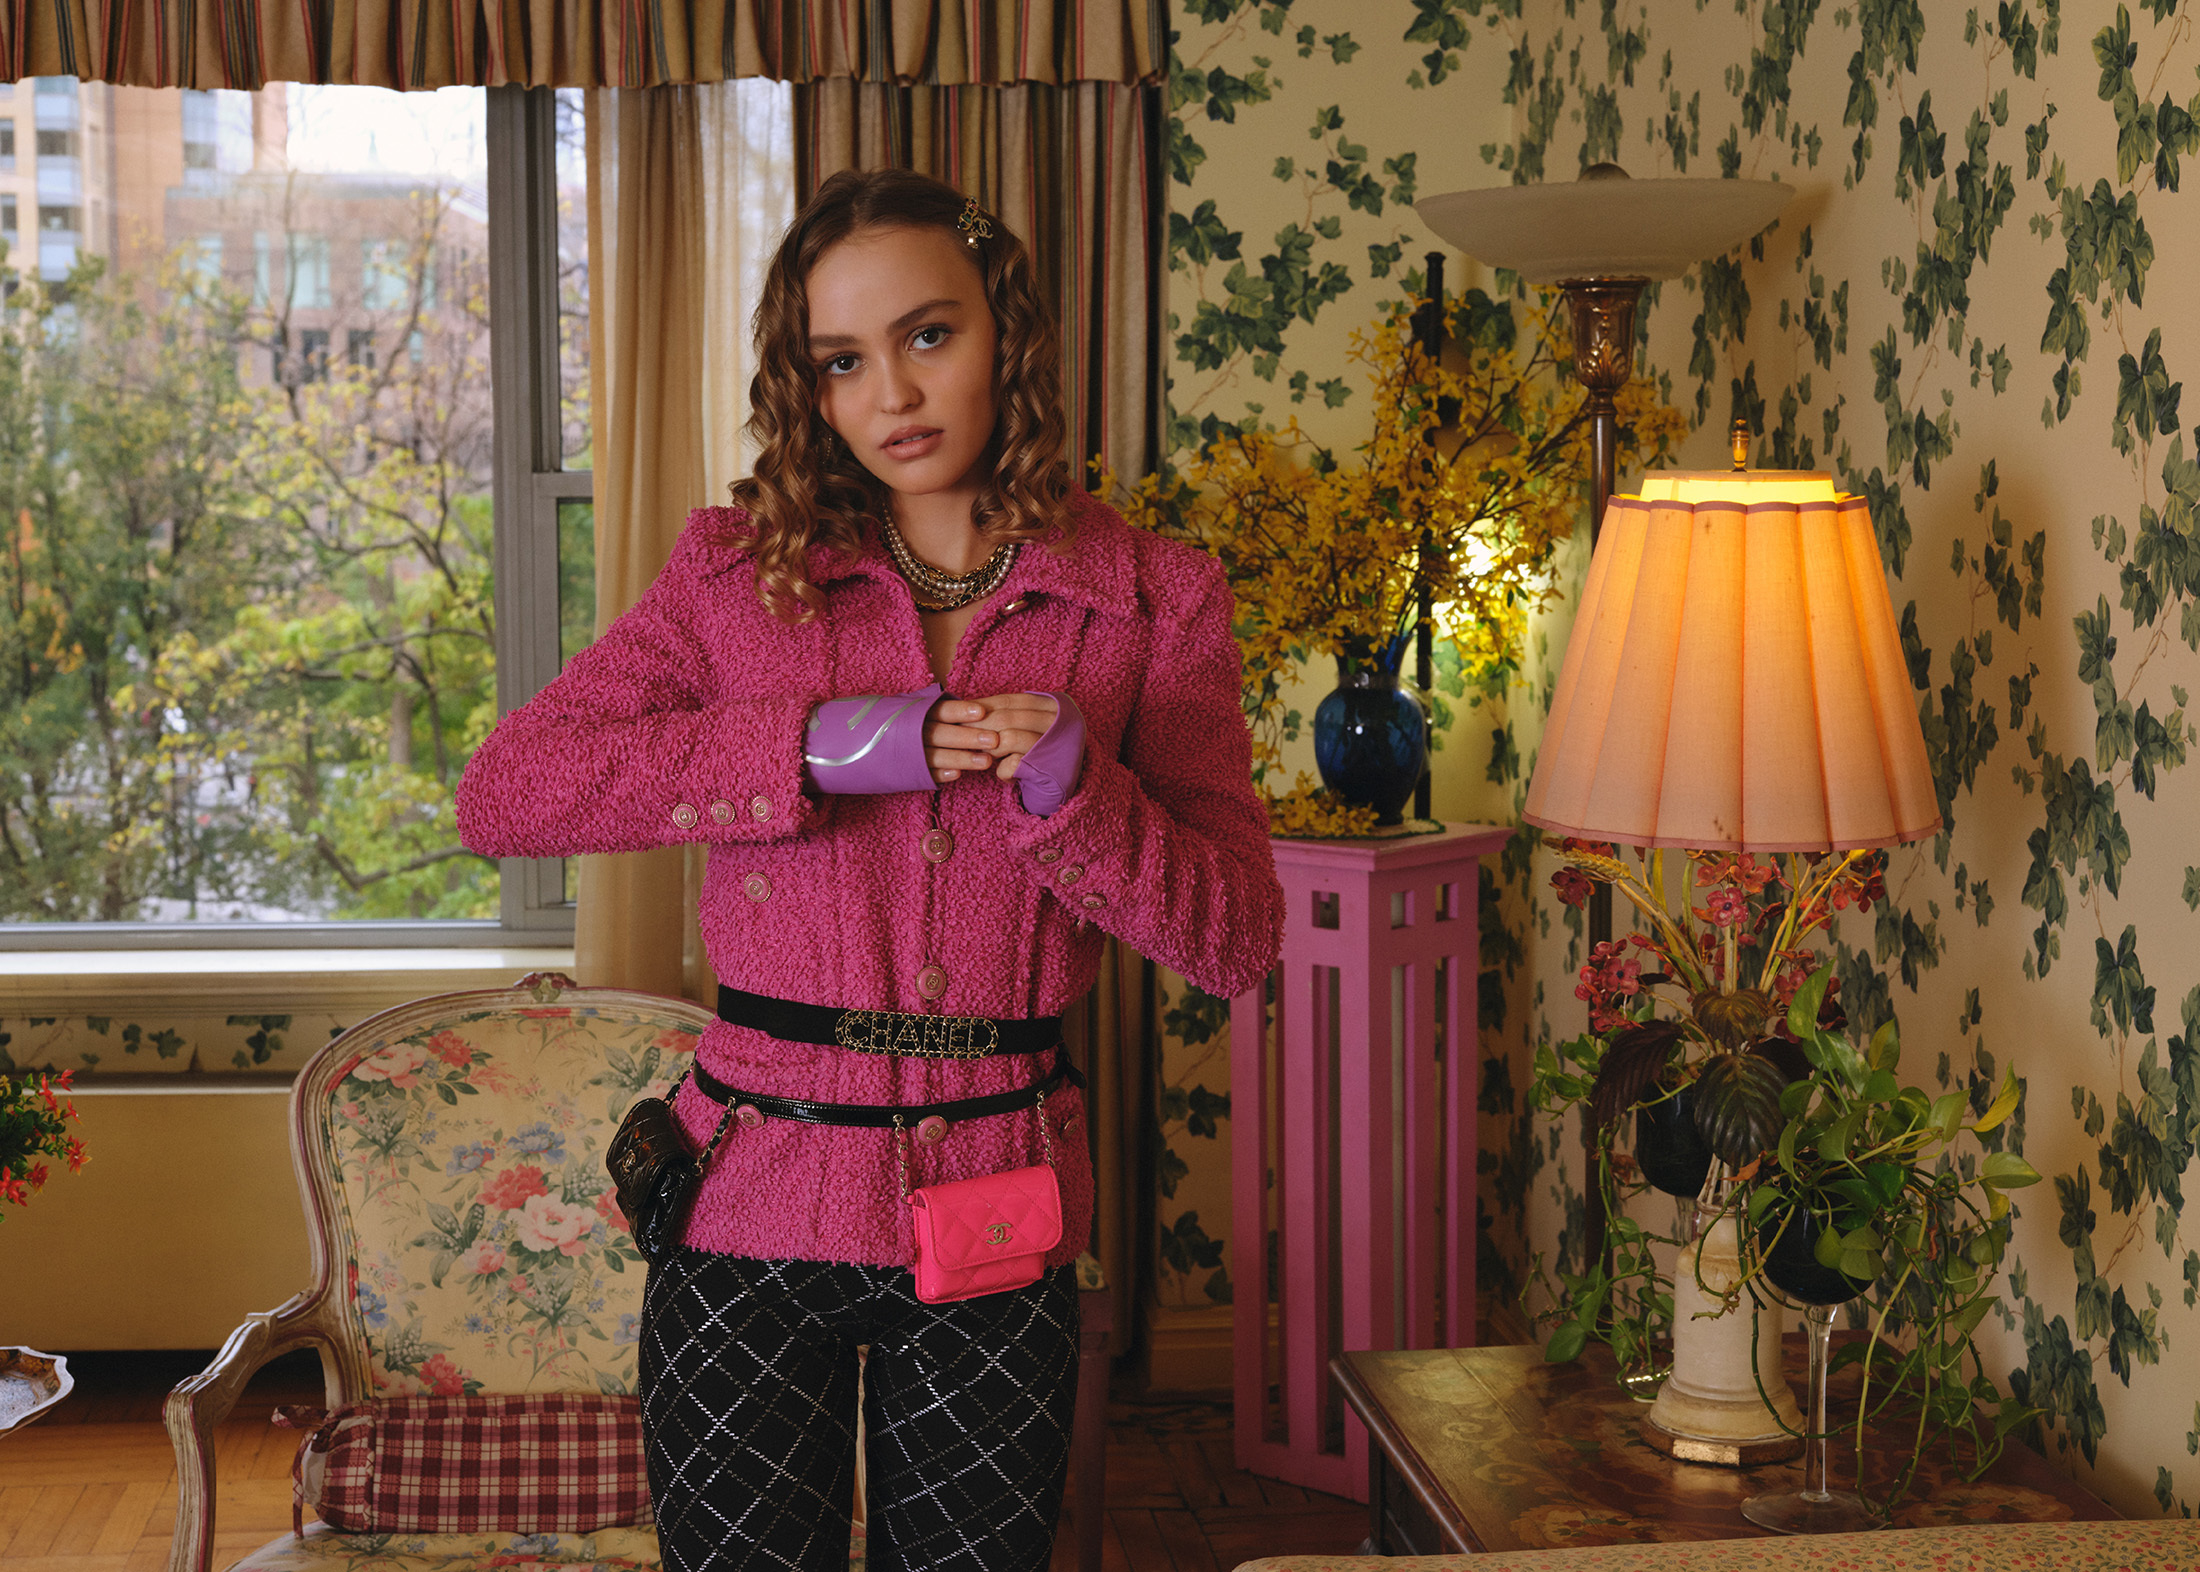 Lily Rose Depp 2019 Wallpaper, HD Celebrities 4K Wallpapers, Images and